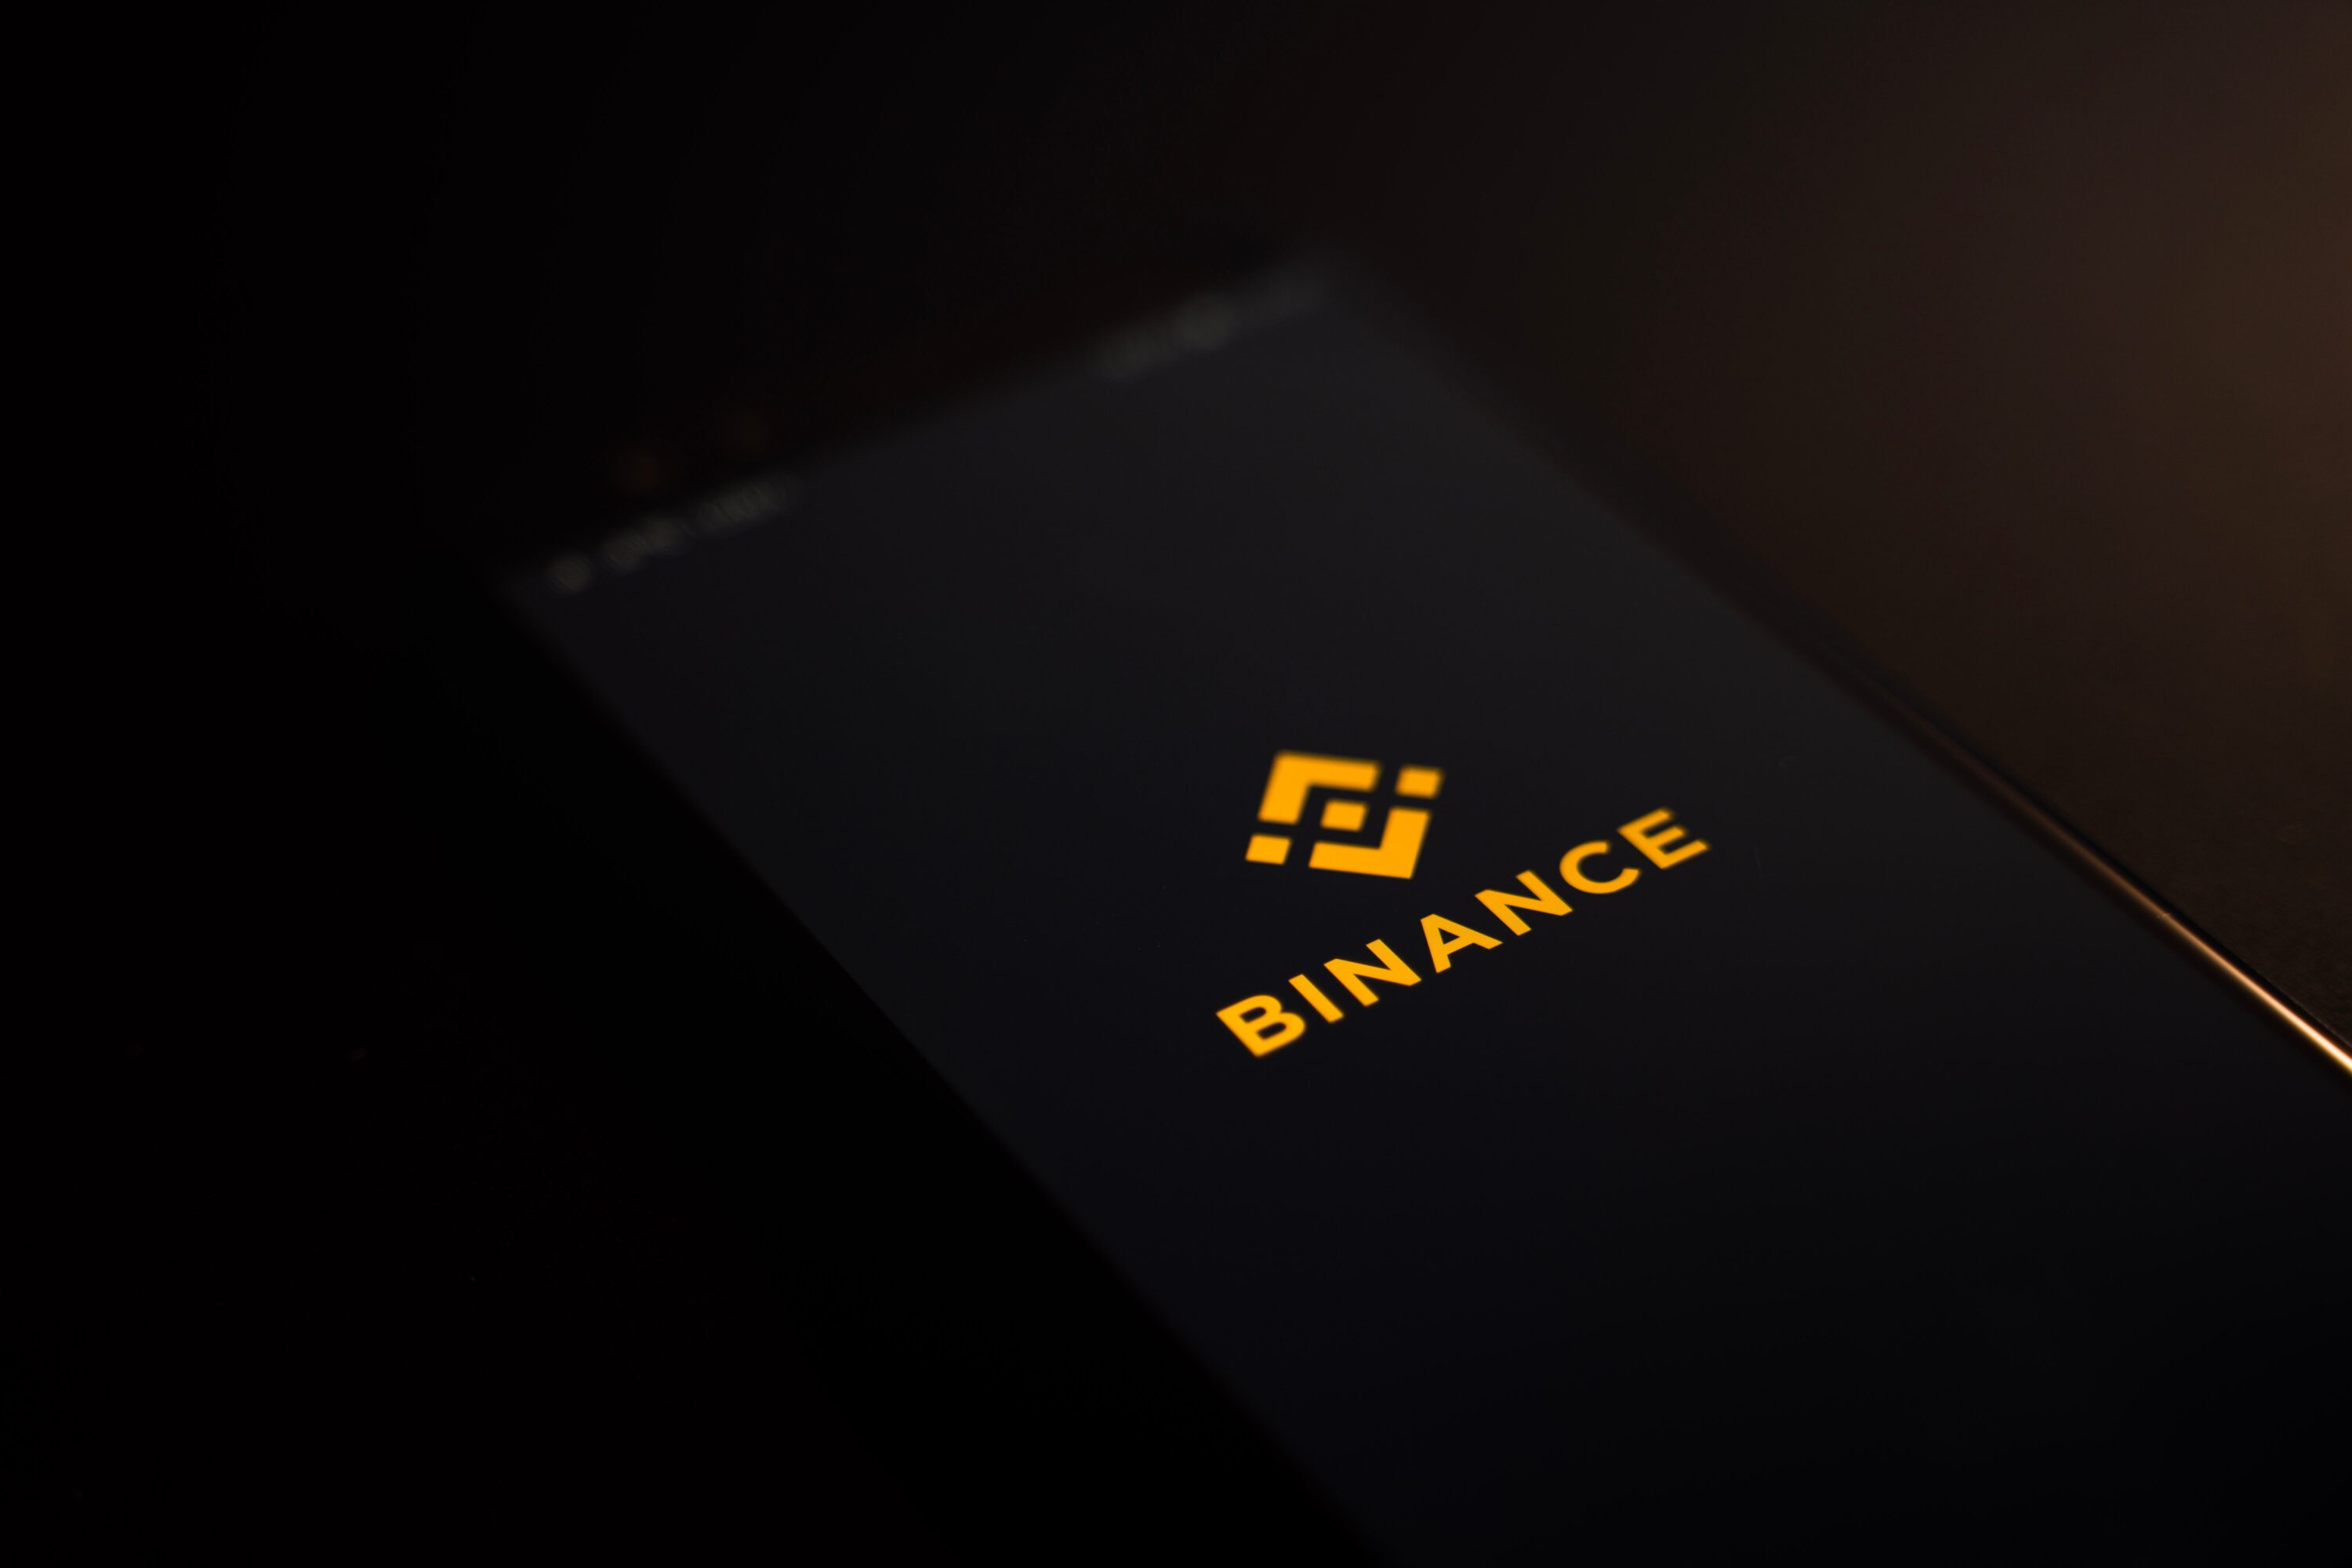 Binance responds to SEC’s ‘unreasonable’ and ‘burdensome’ requests